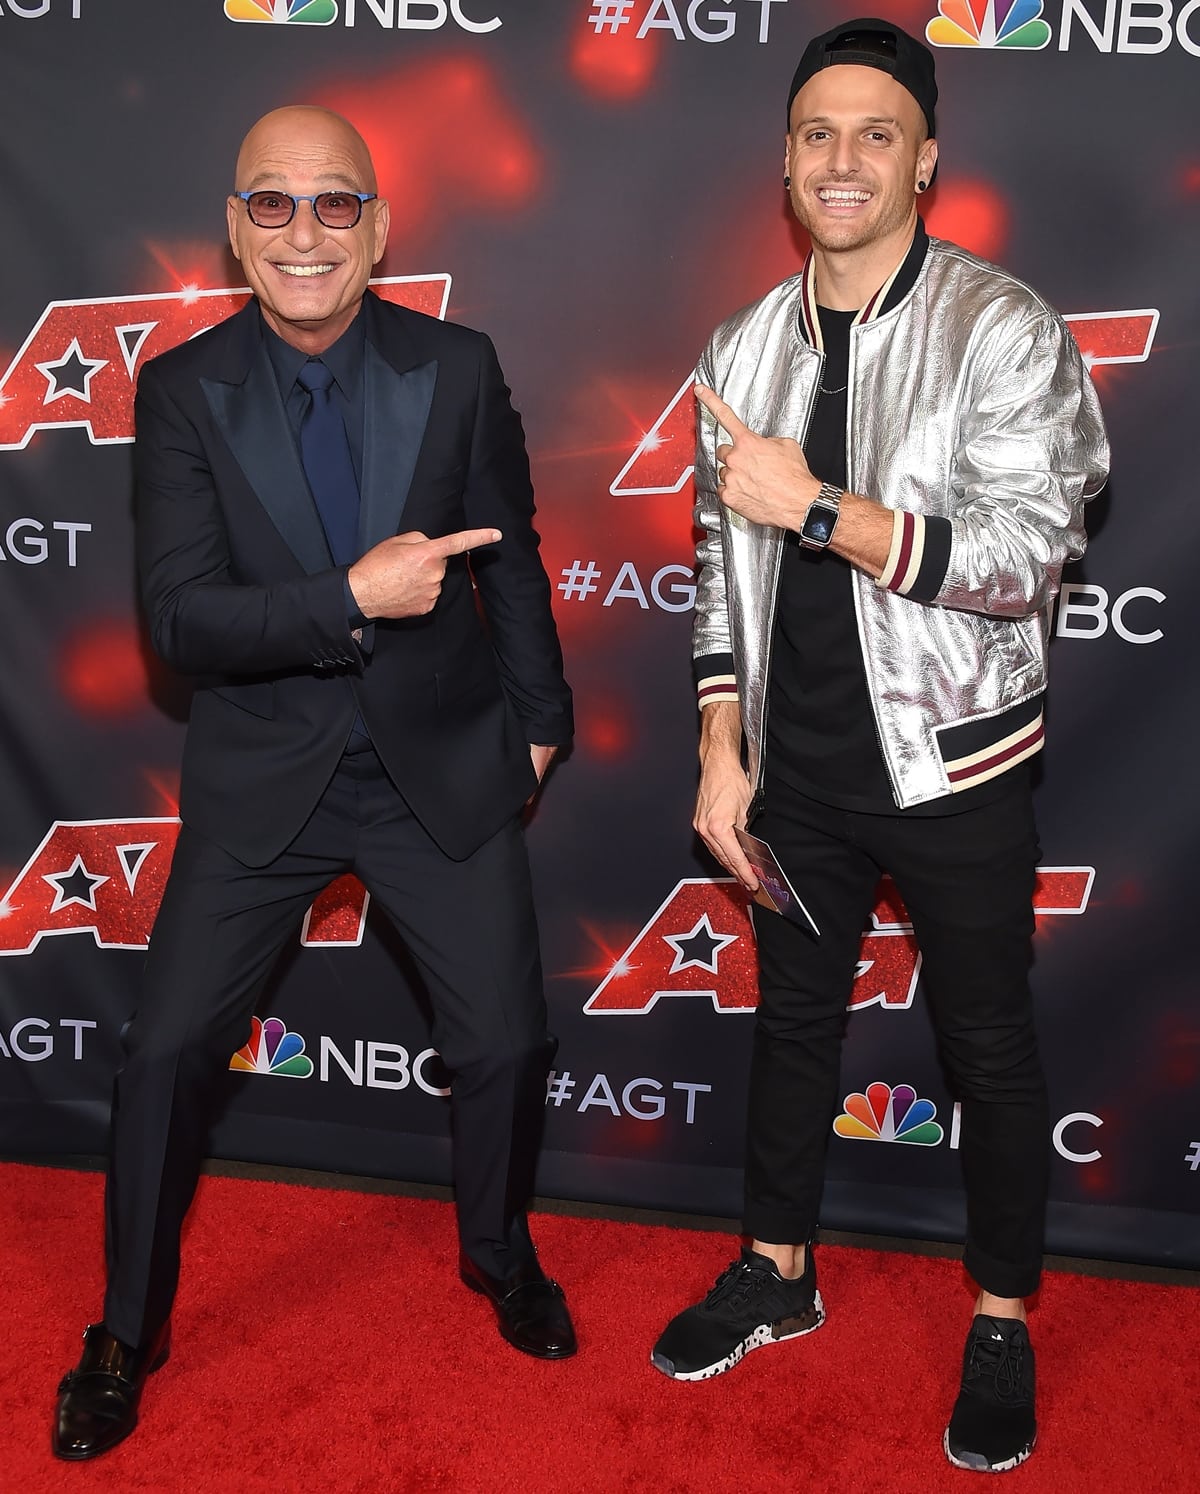 Howie Mandel (L) posing with Dustin Tavella, the Christian magician winner of NBC's hit series "America’s Got Talent"